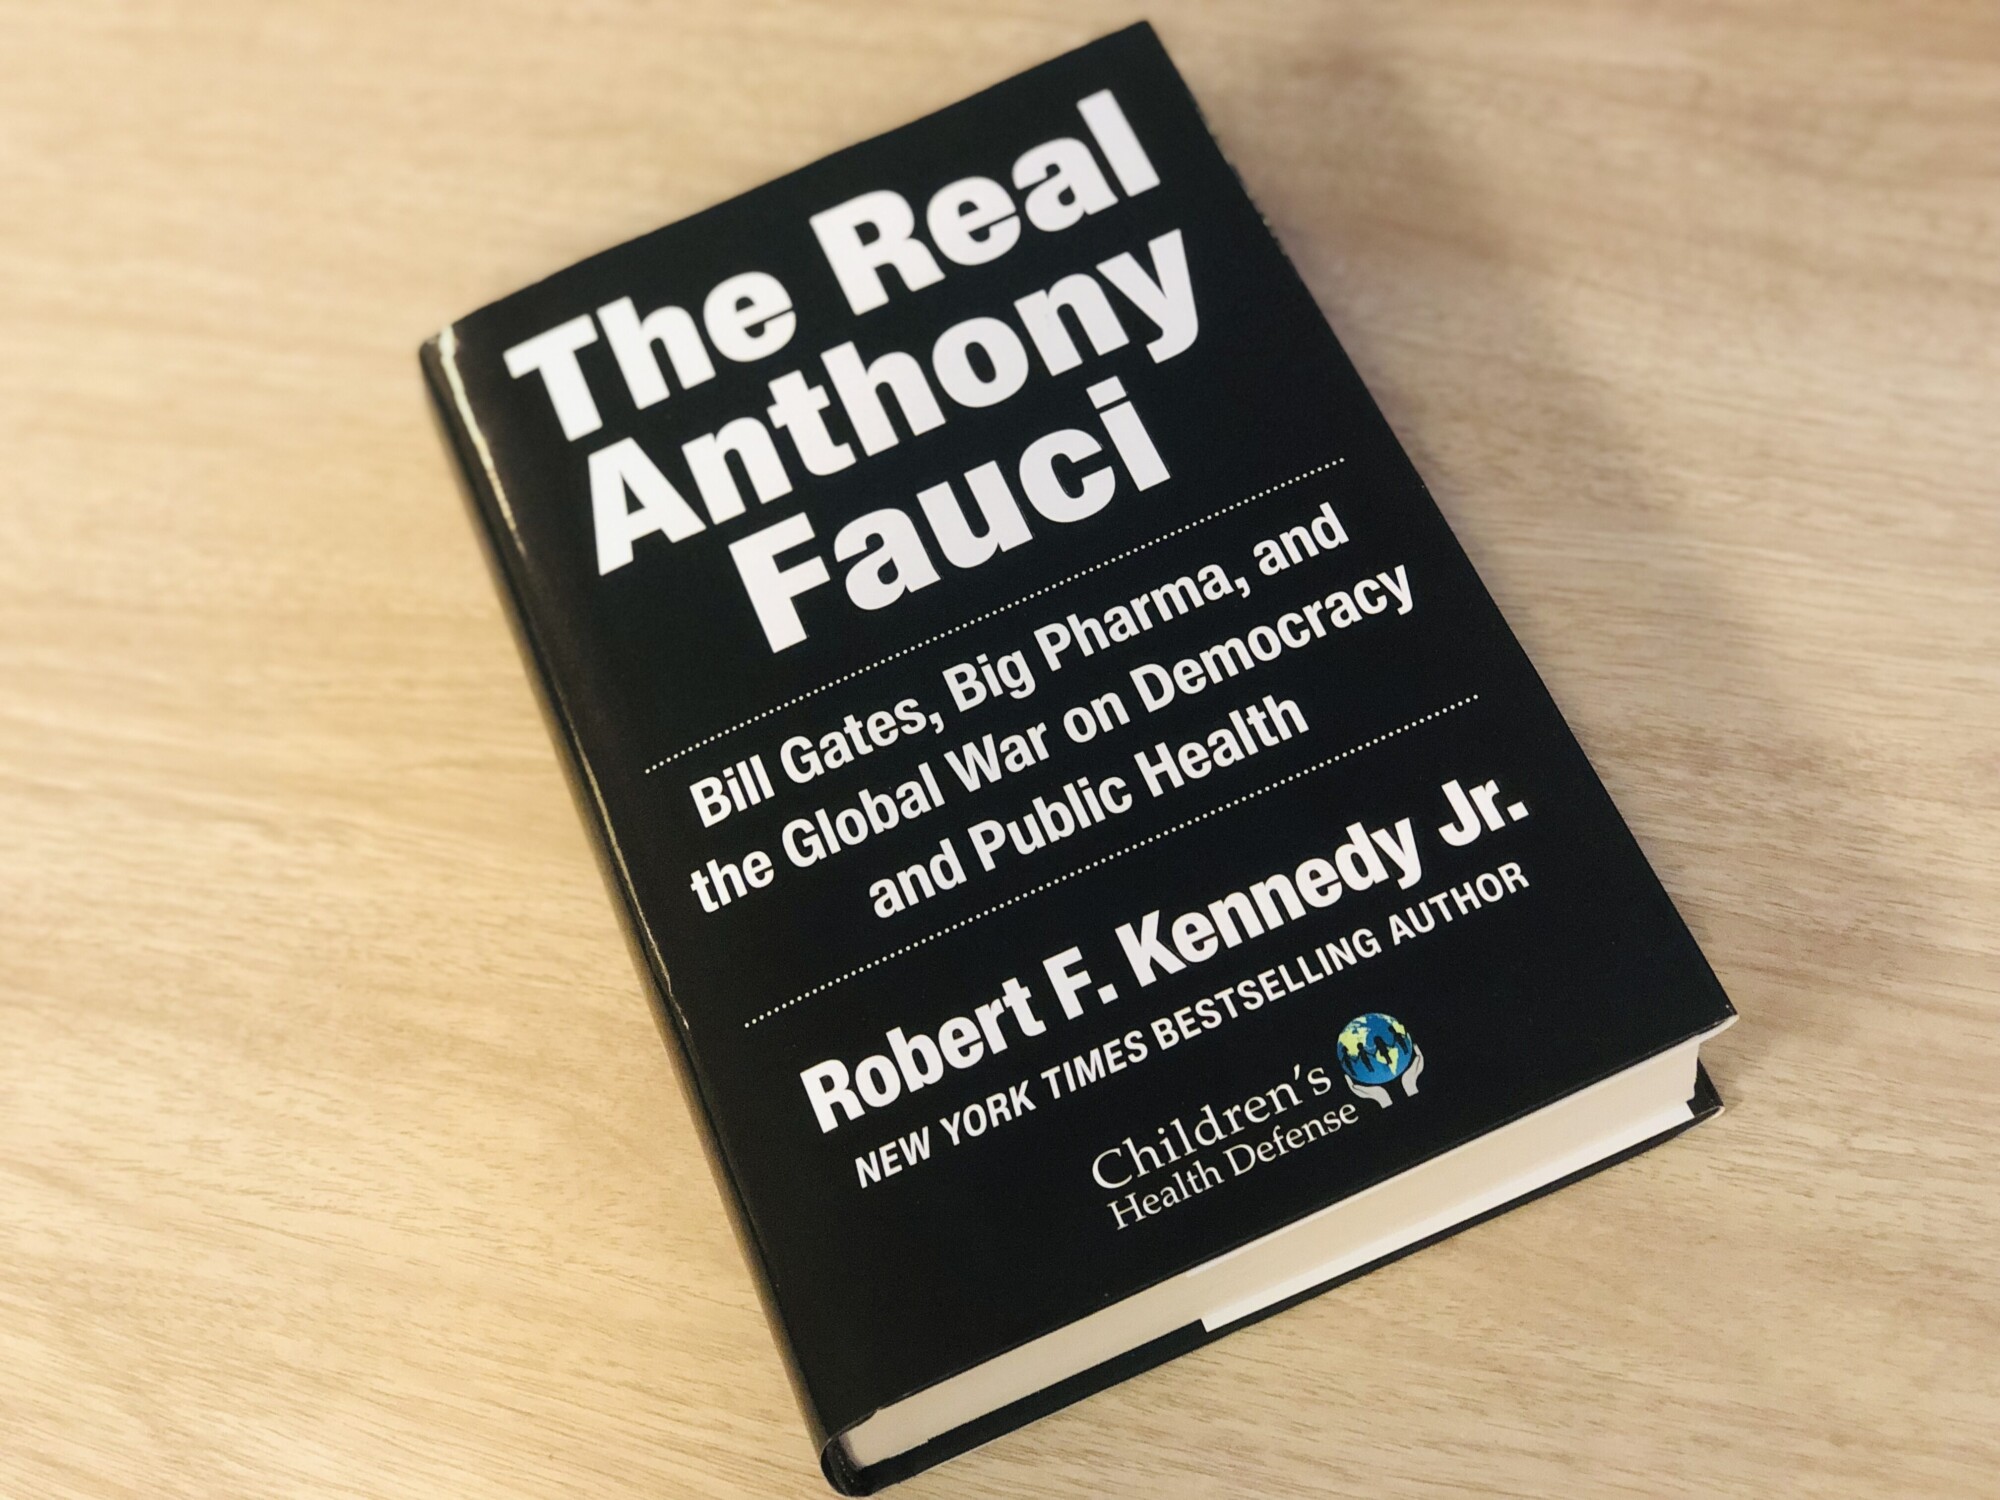 ‘The Real Anthony Fauci’ Exposes the Controlled Demolition of Democracy: R.F. Kennedy Jr.